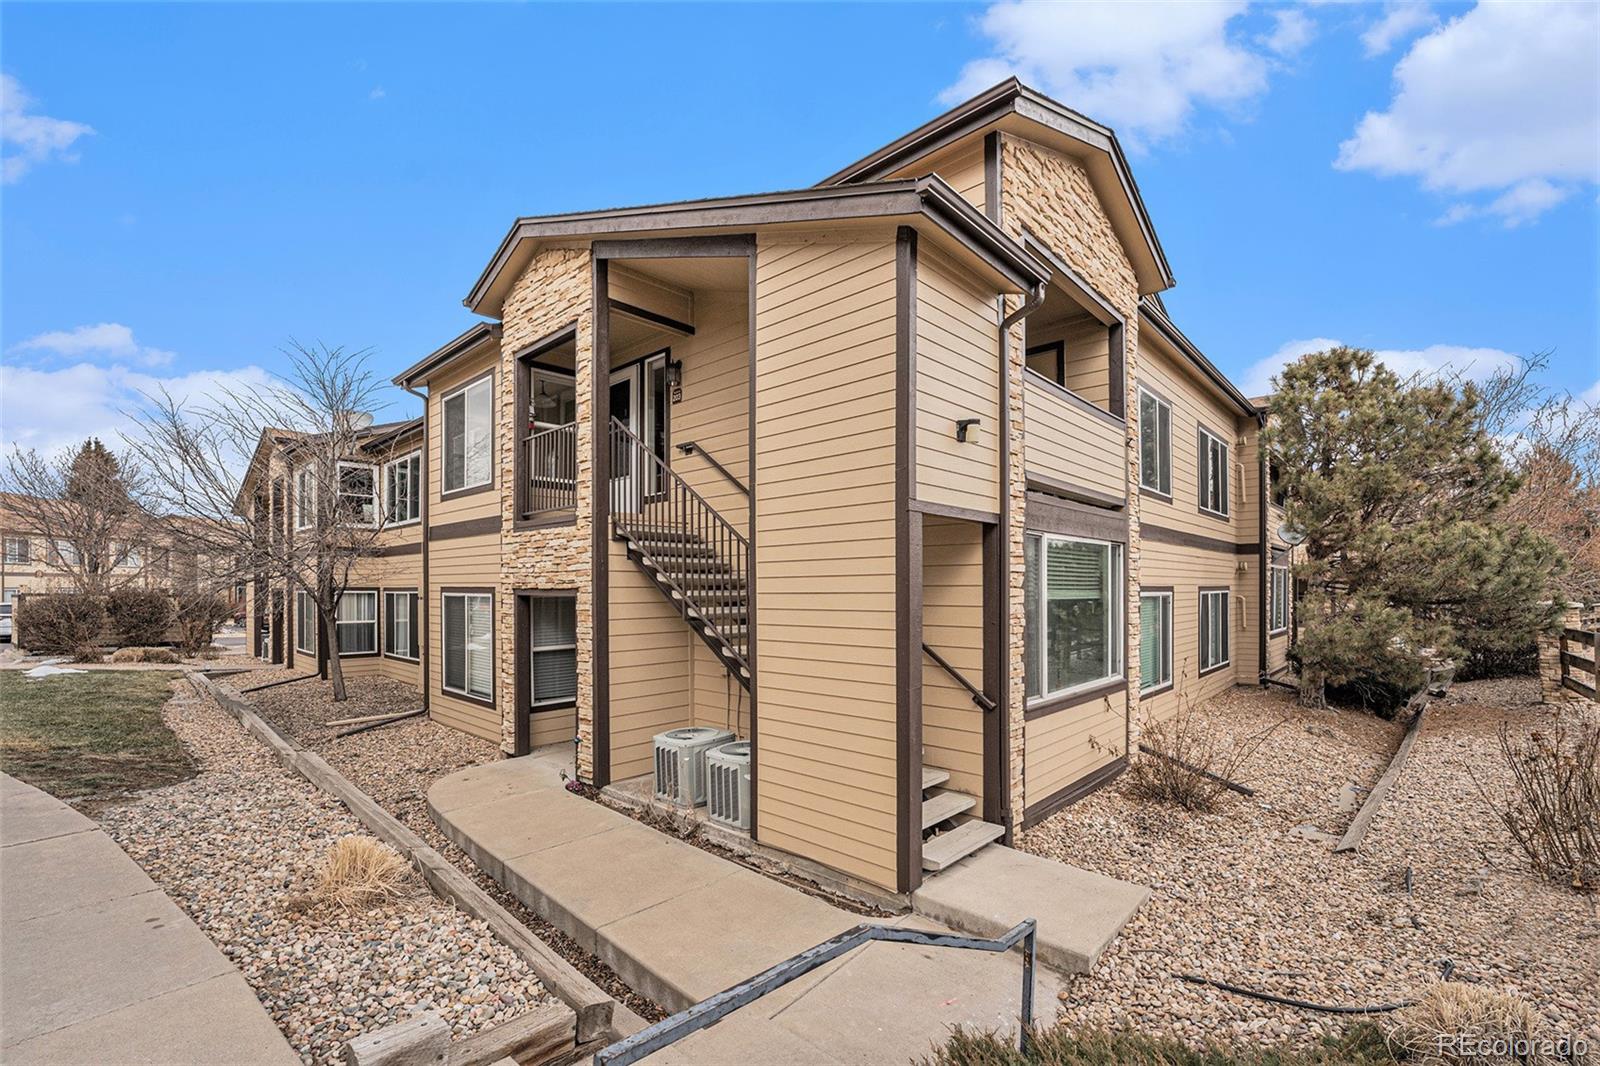 4875 s balsam way, Denver sold home. Closed on 2024-04-04 for $350,000.